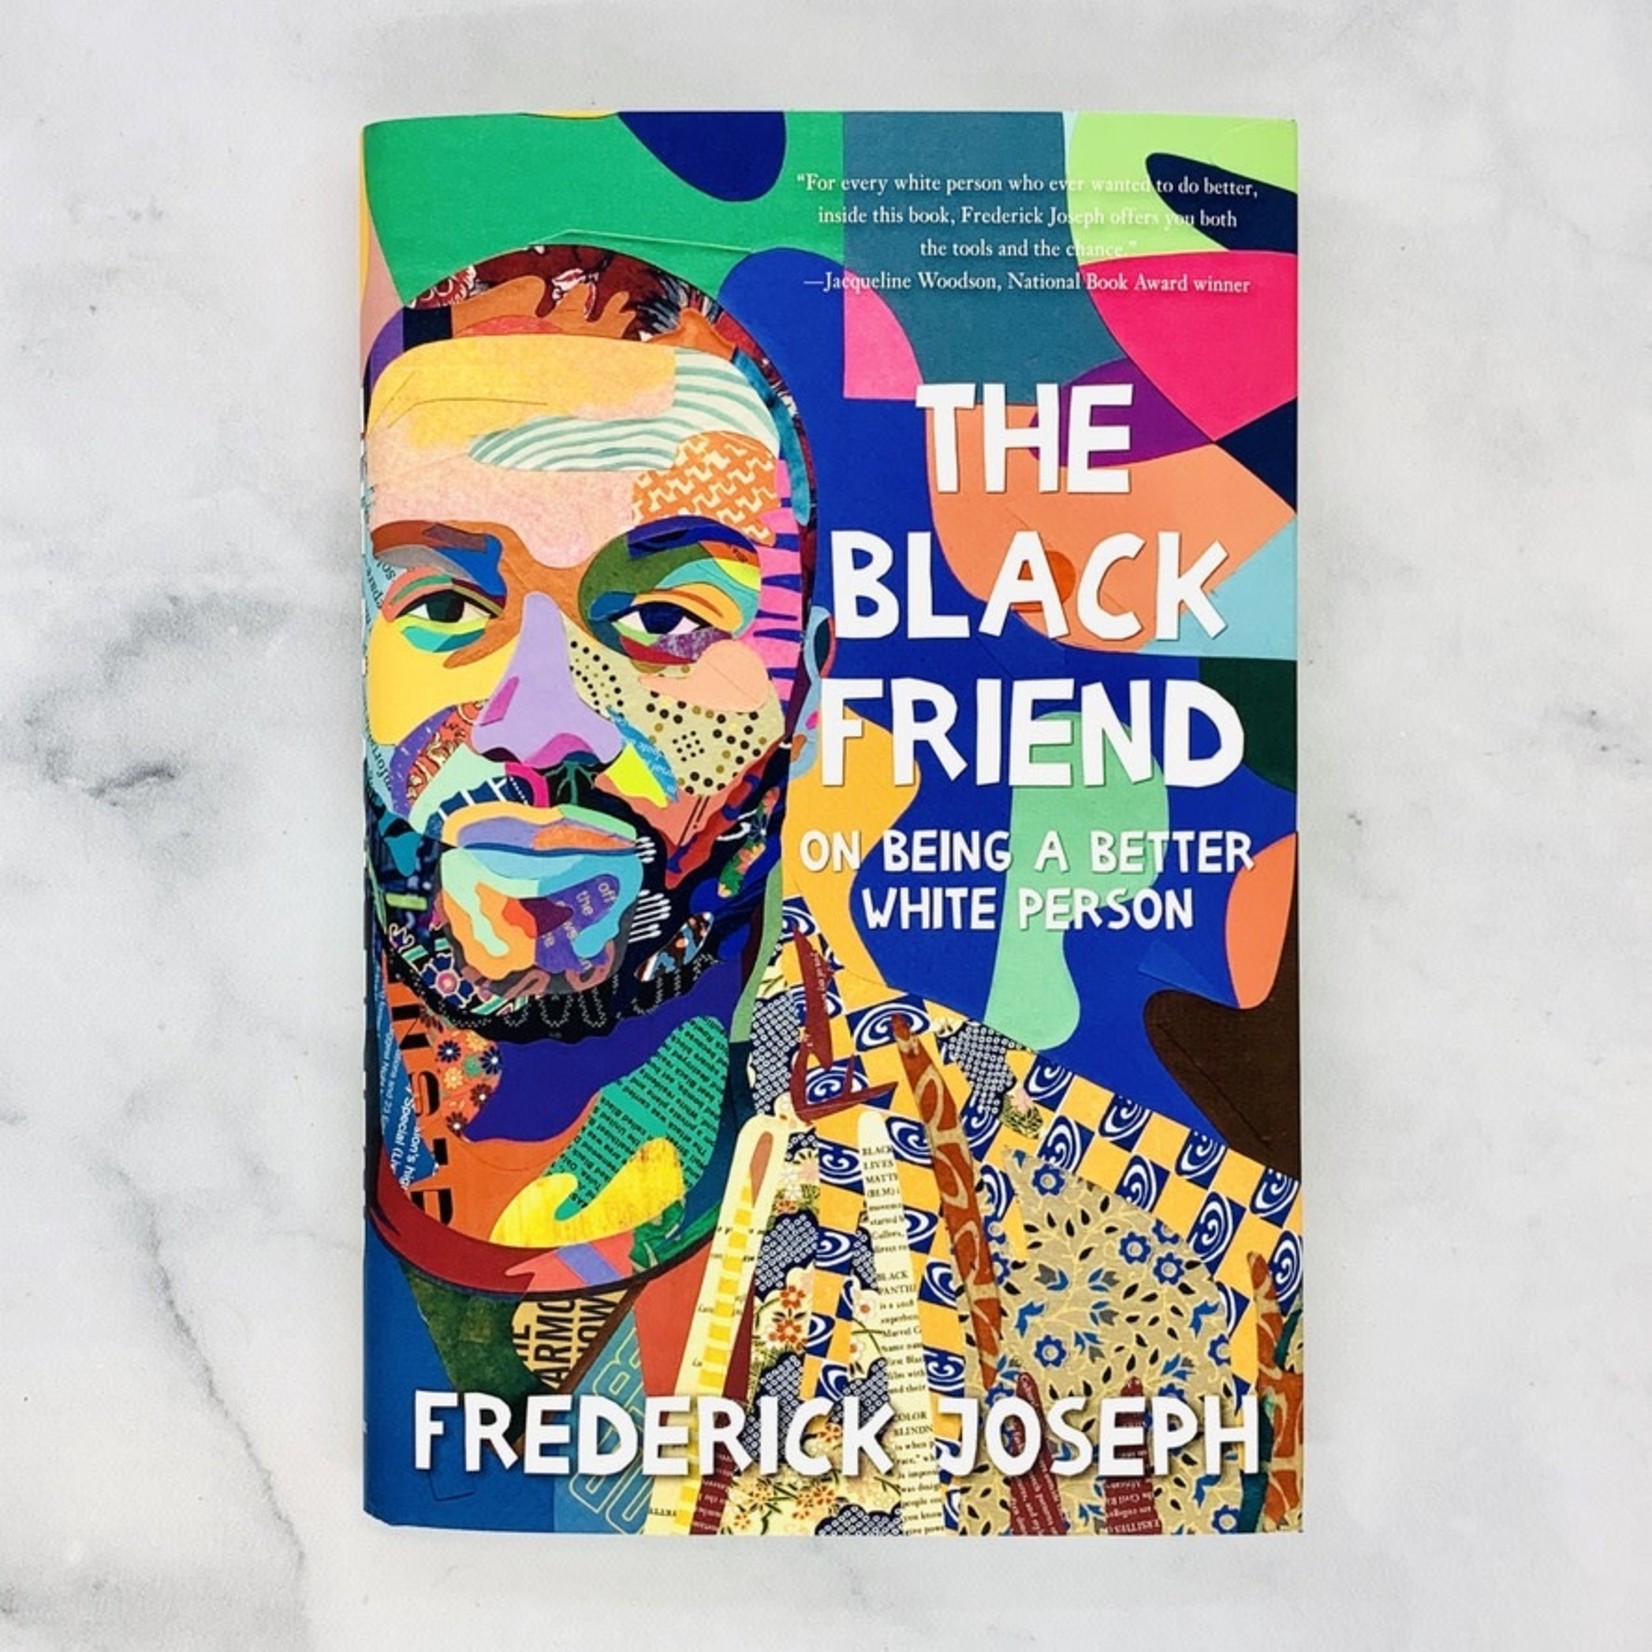 The Black Friend: On Being A Better White Person